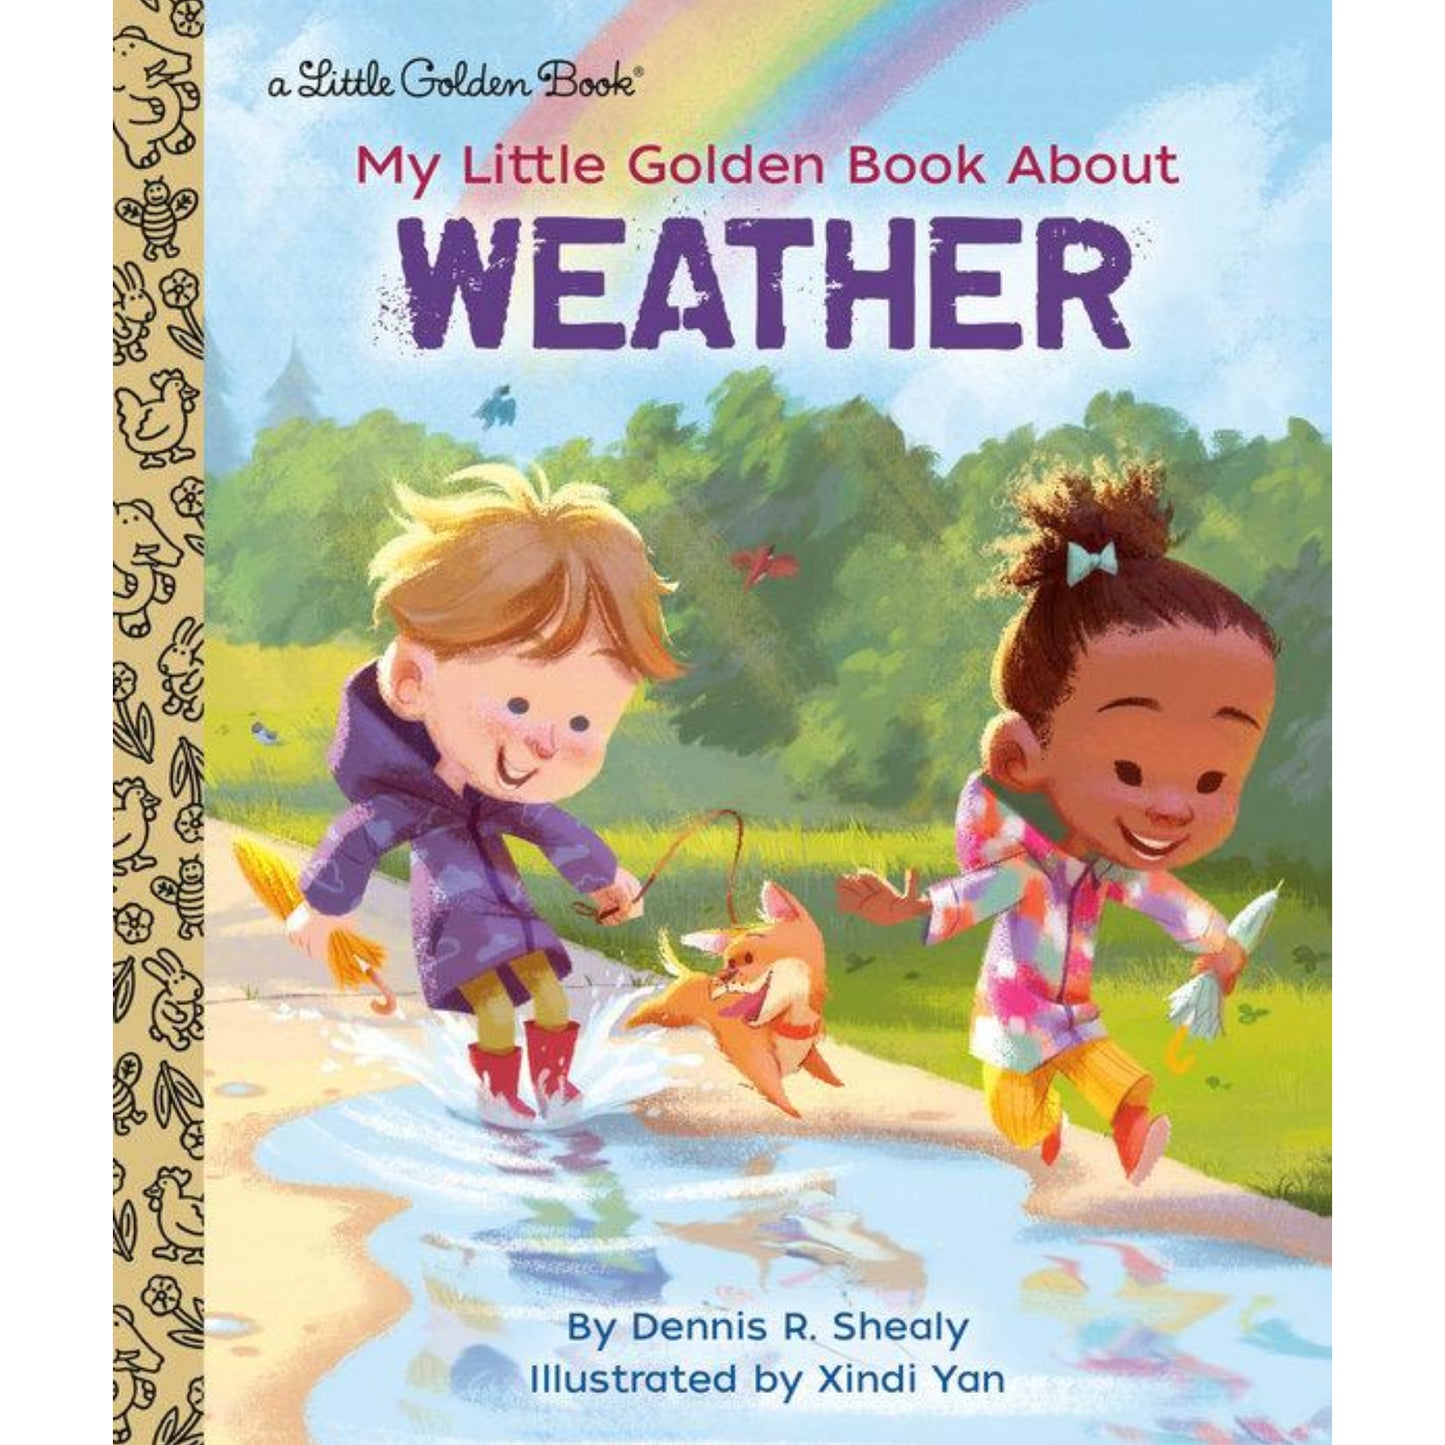 My Little Golden Book About Weather